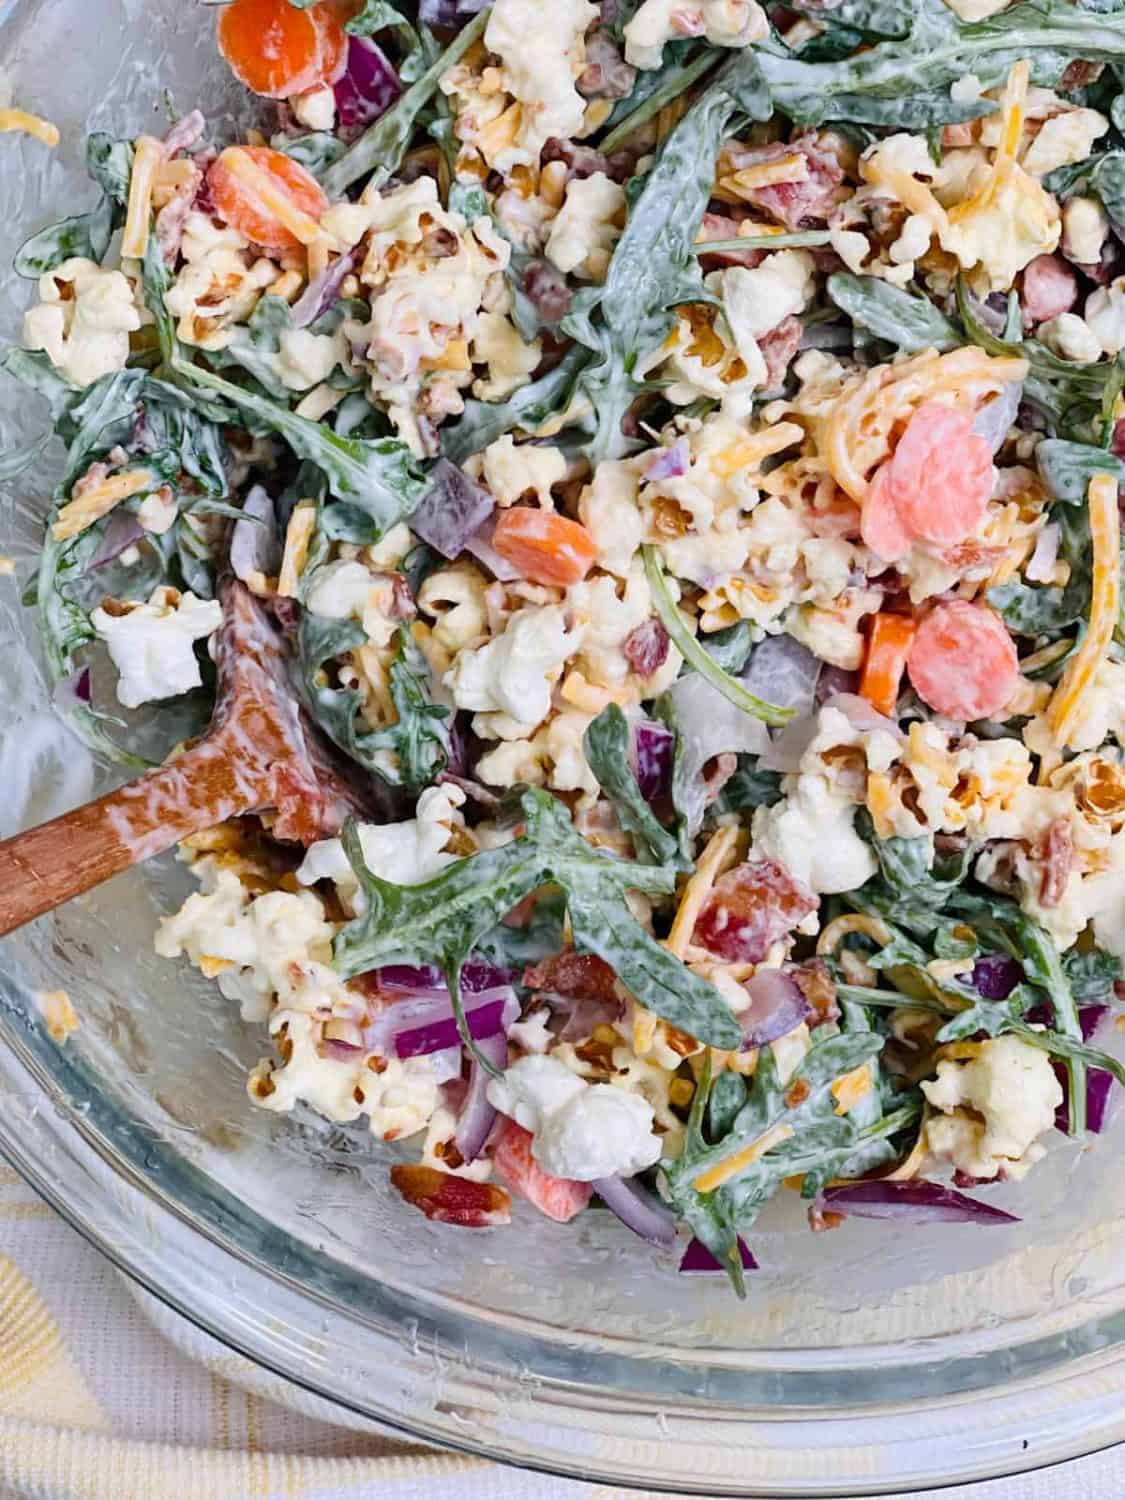 Popcorn Salad Recipe inspired by Molly Yeh’s Viral Salad